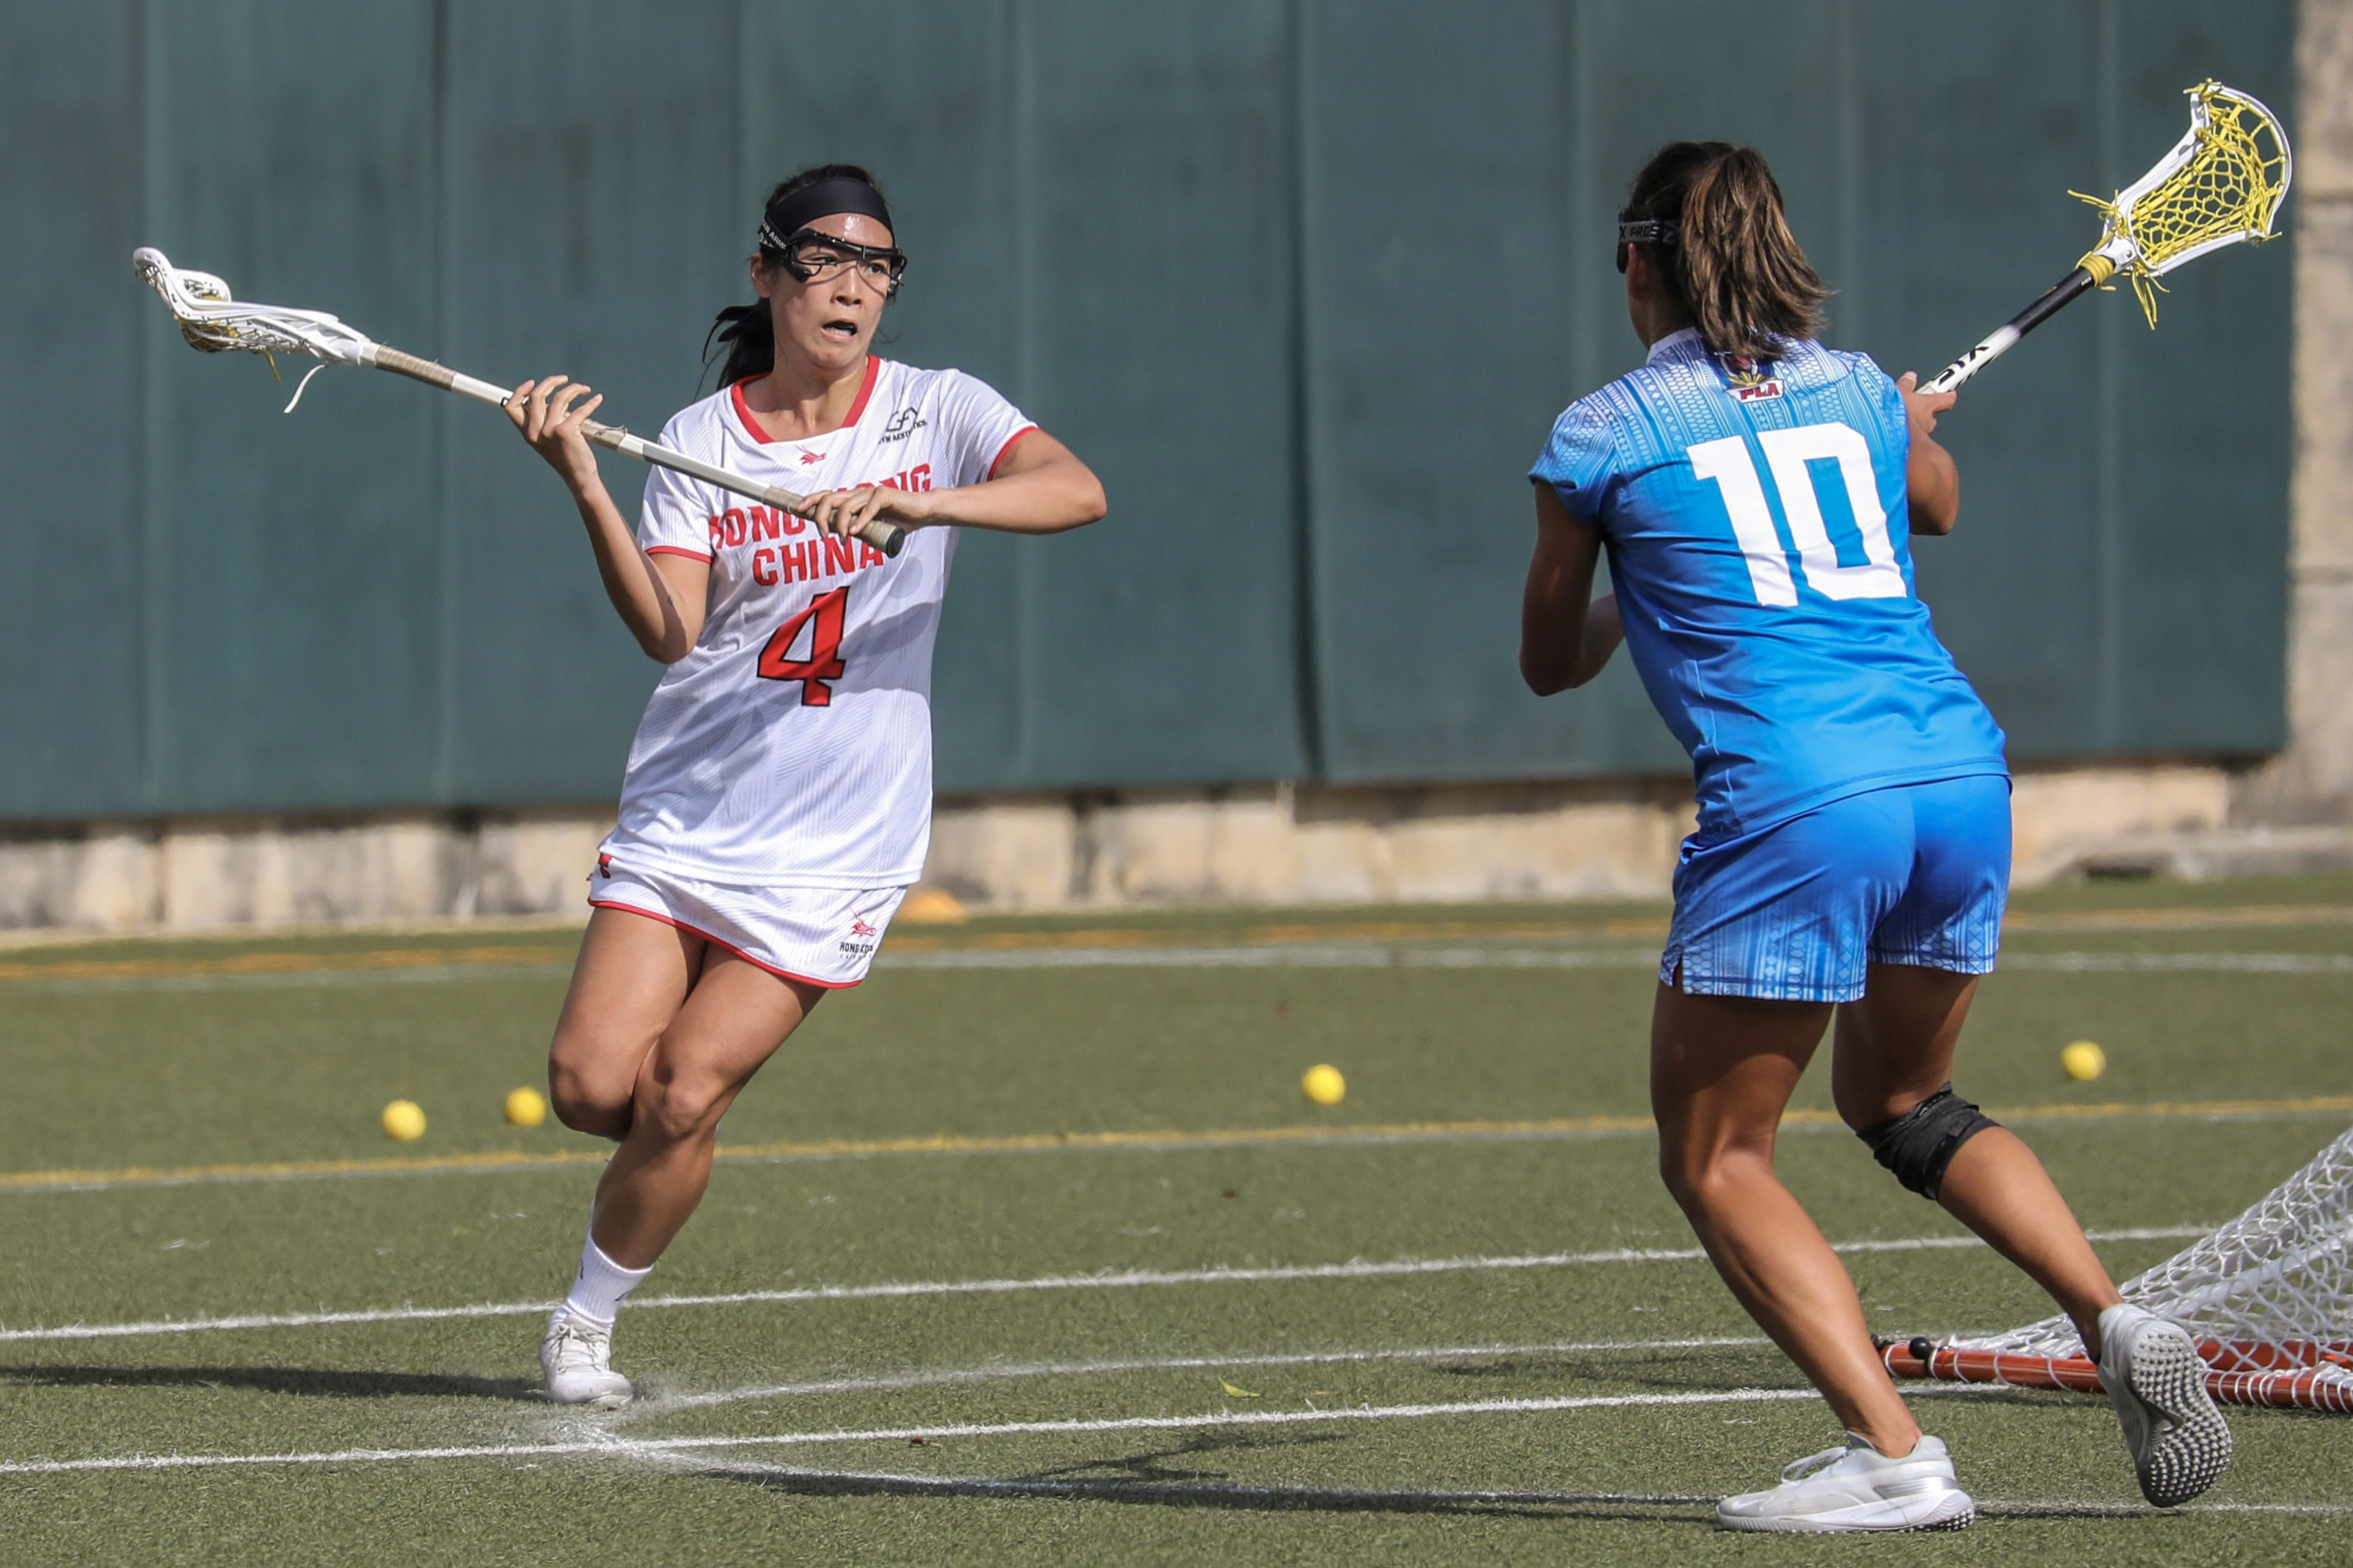 Hong Kong’s Leona Chak (left) drives forward during her side’s game against the  Philippines at the World Lacrosse Super Sixes. Photo: Xiaomei Chen